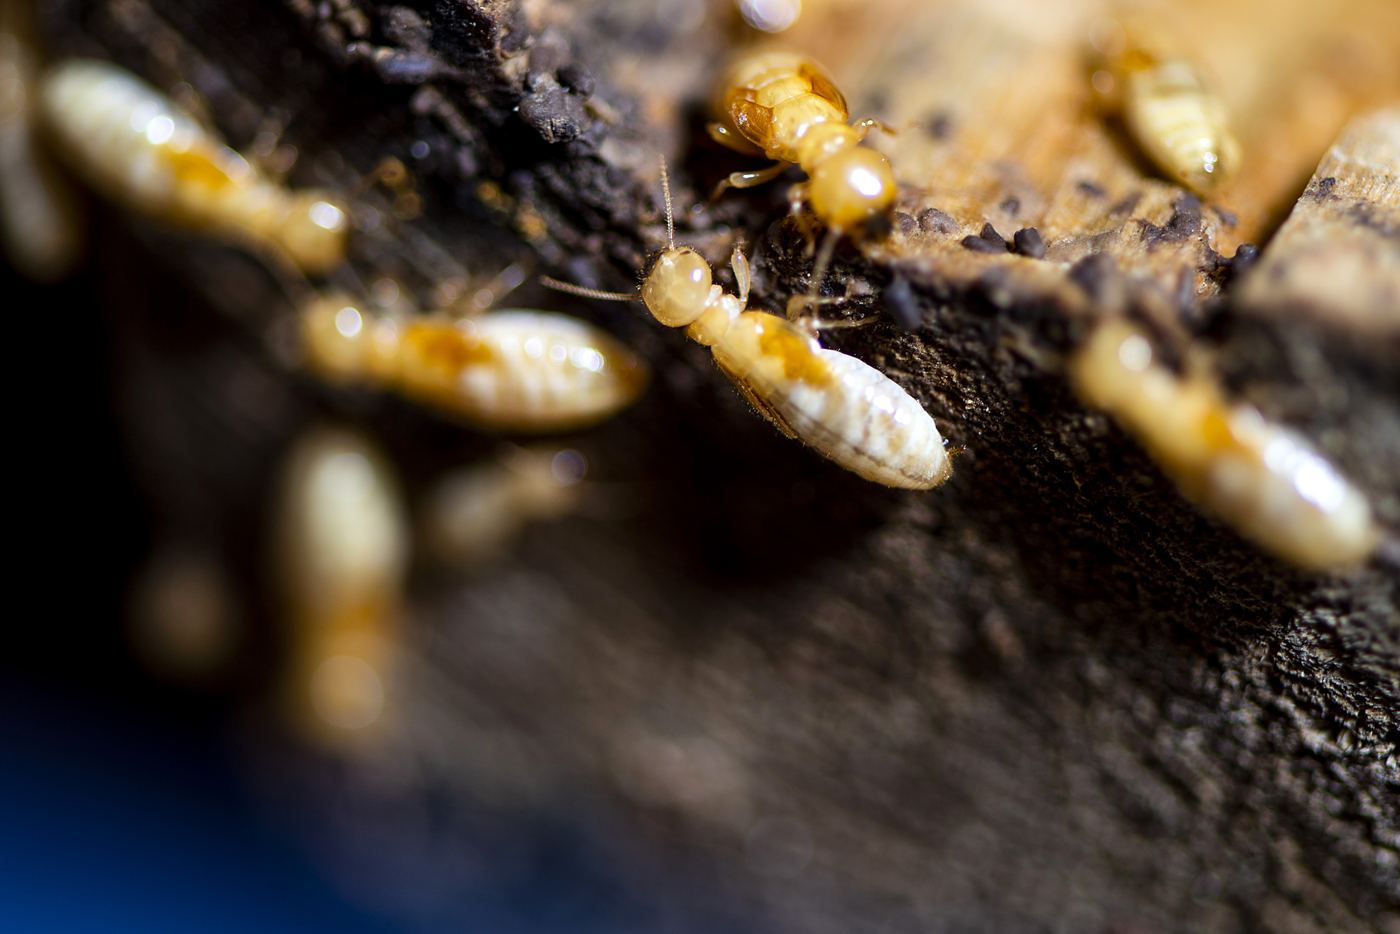 Termite on a piece of wood.